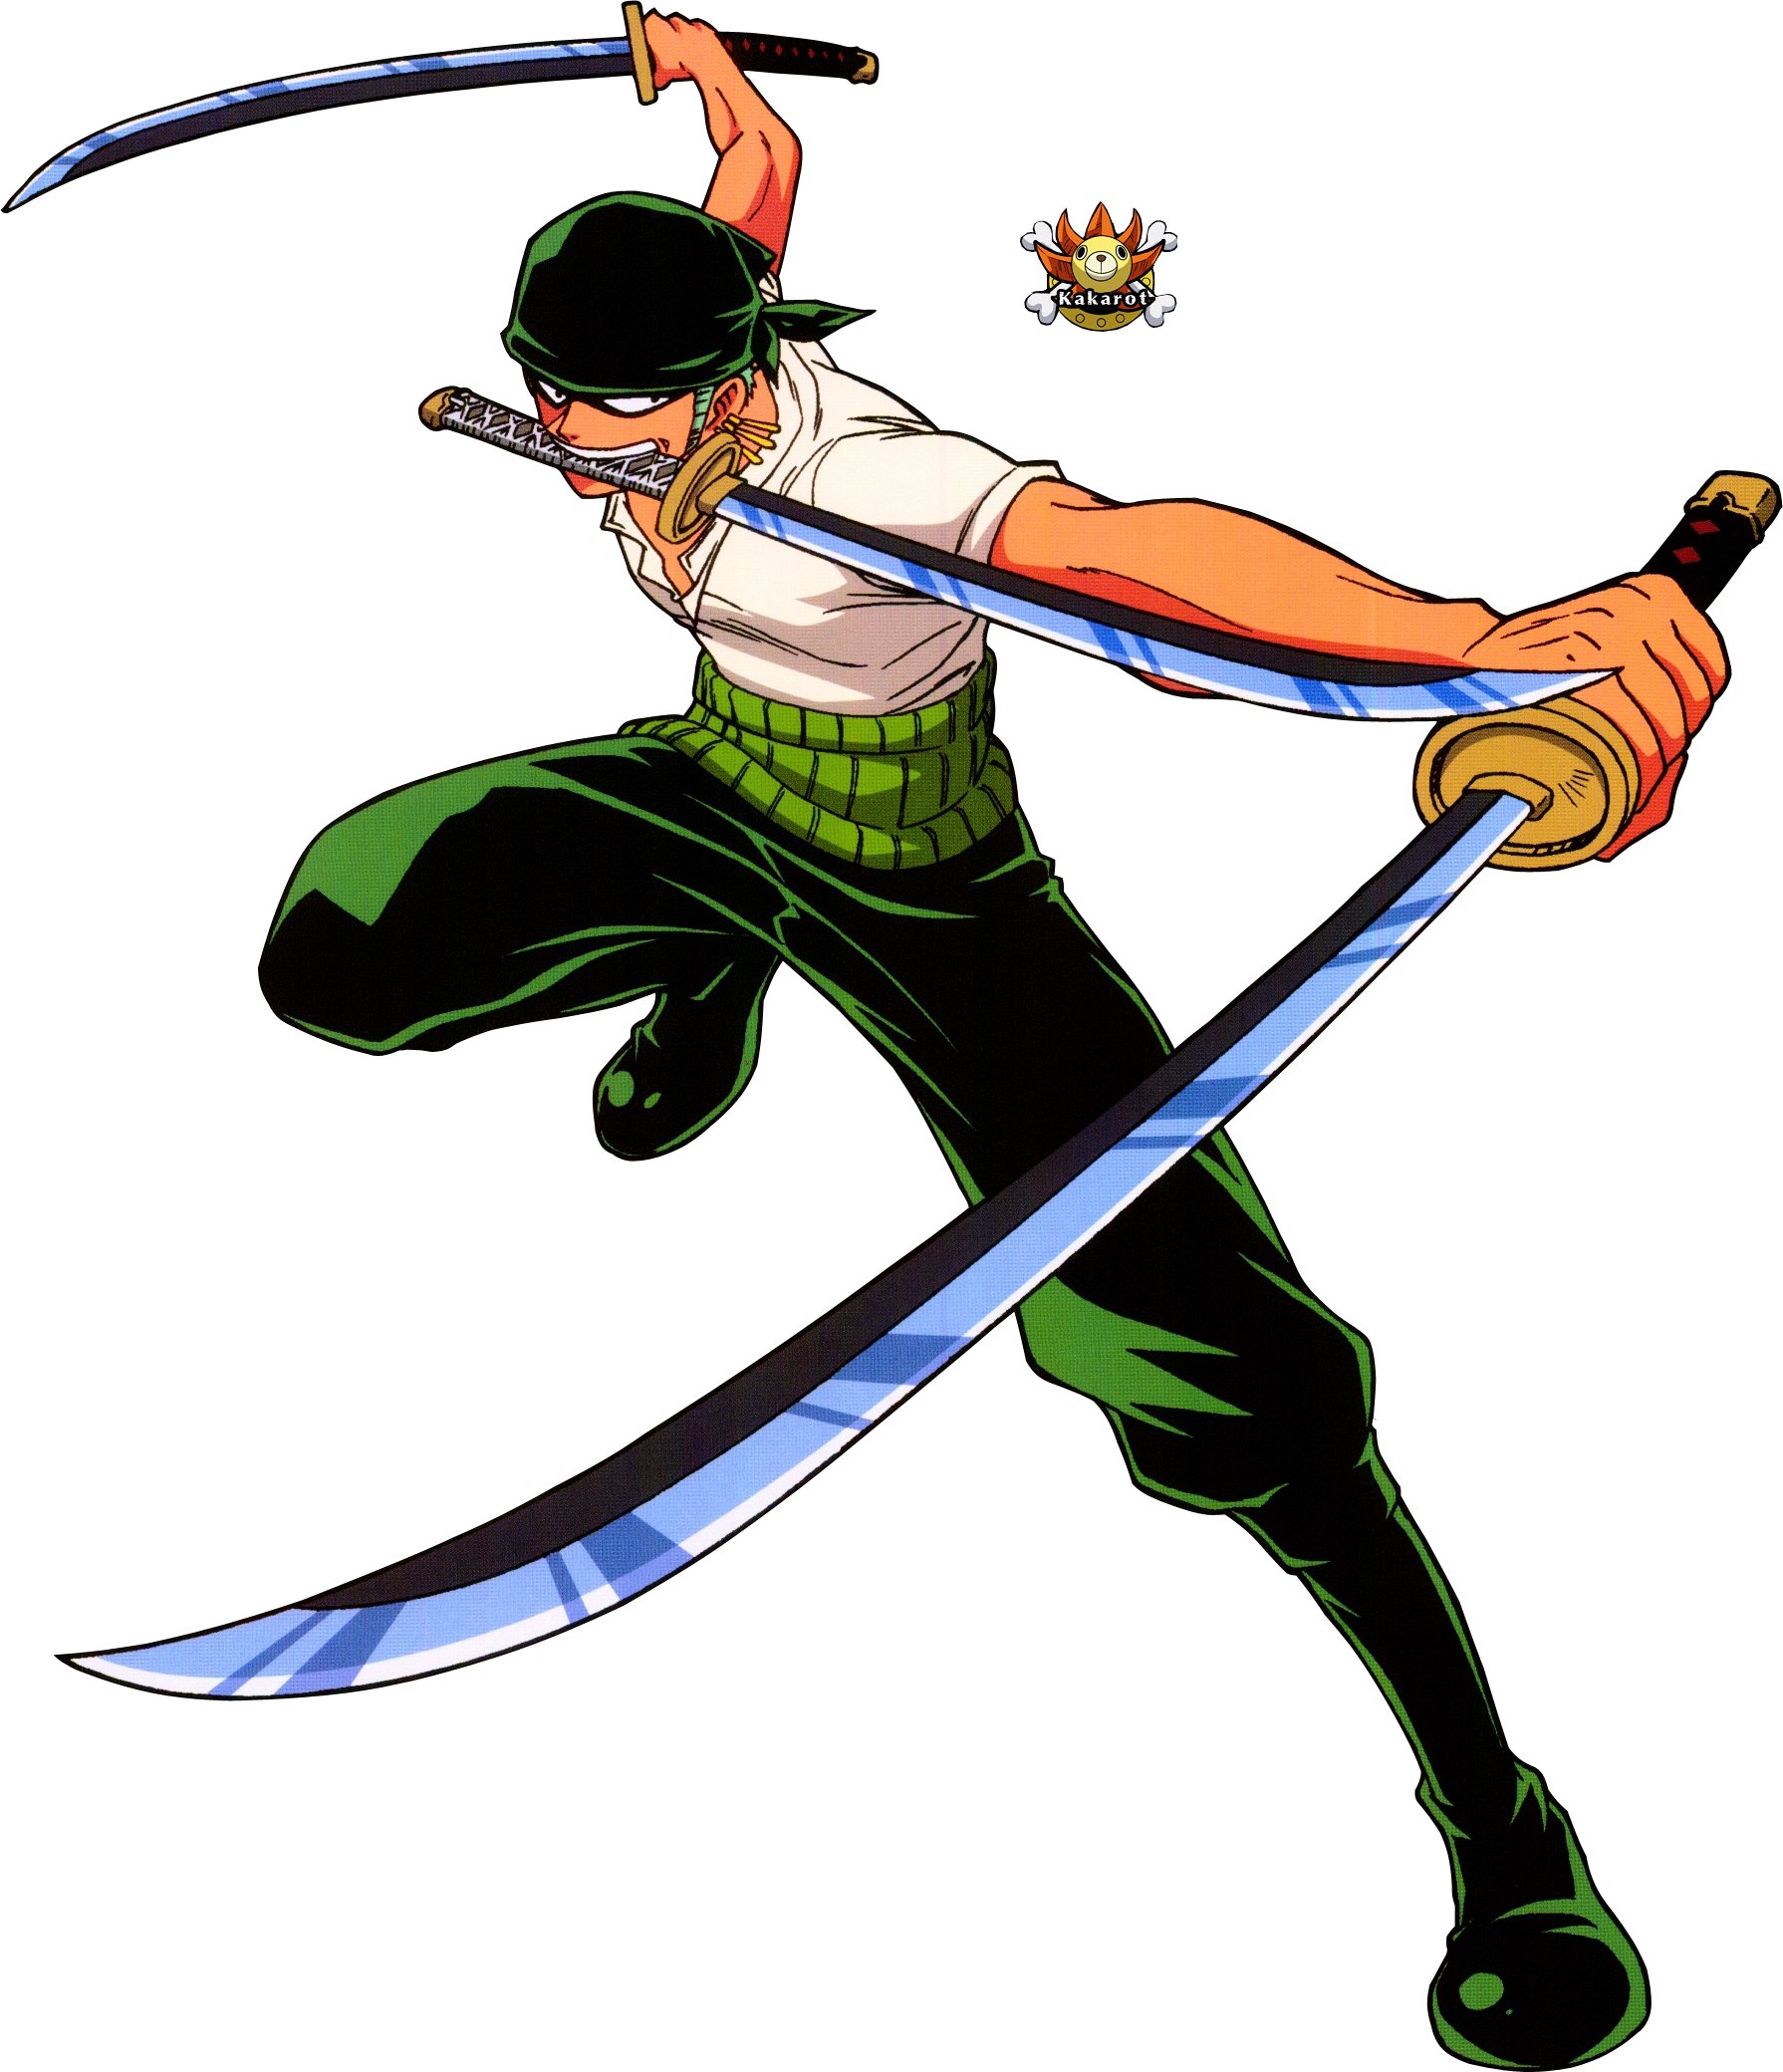 One Piece Zoro Png File - One Piece Zoro Png, Transparent Png